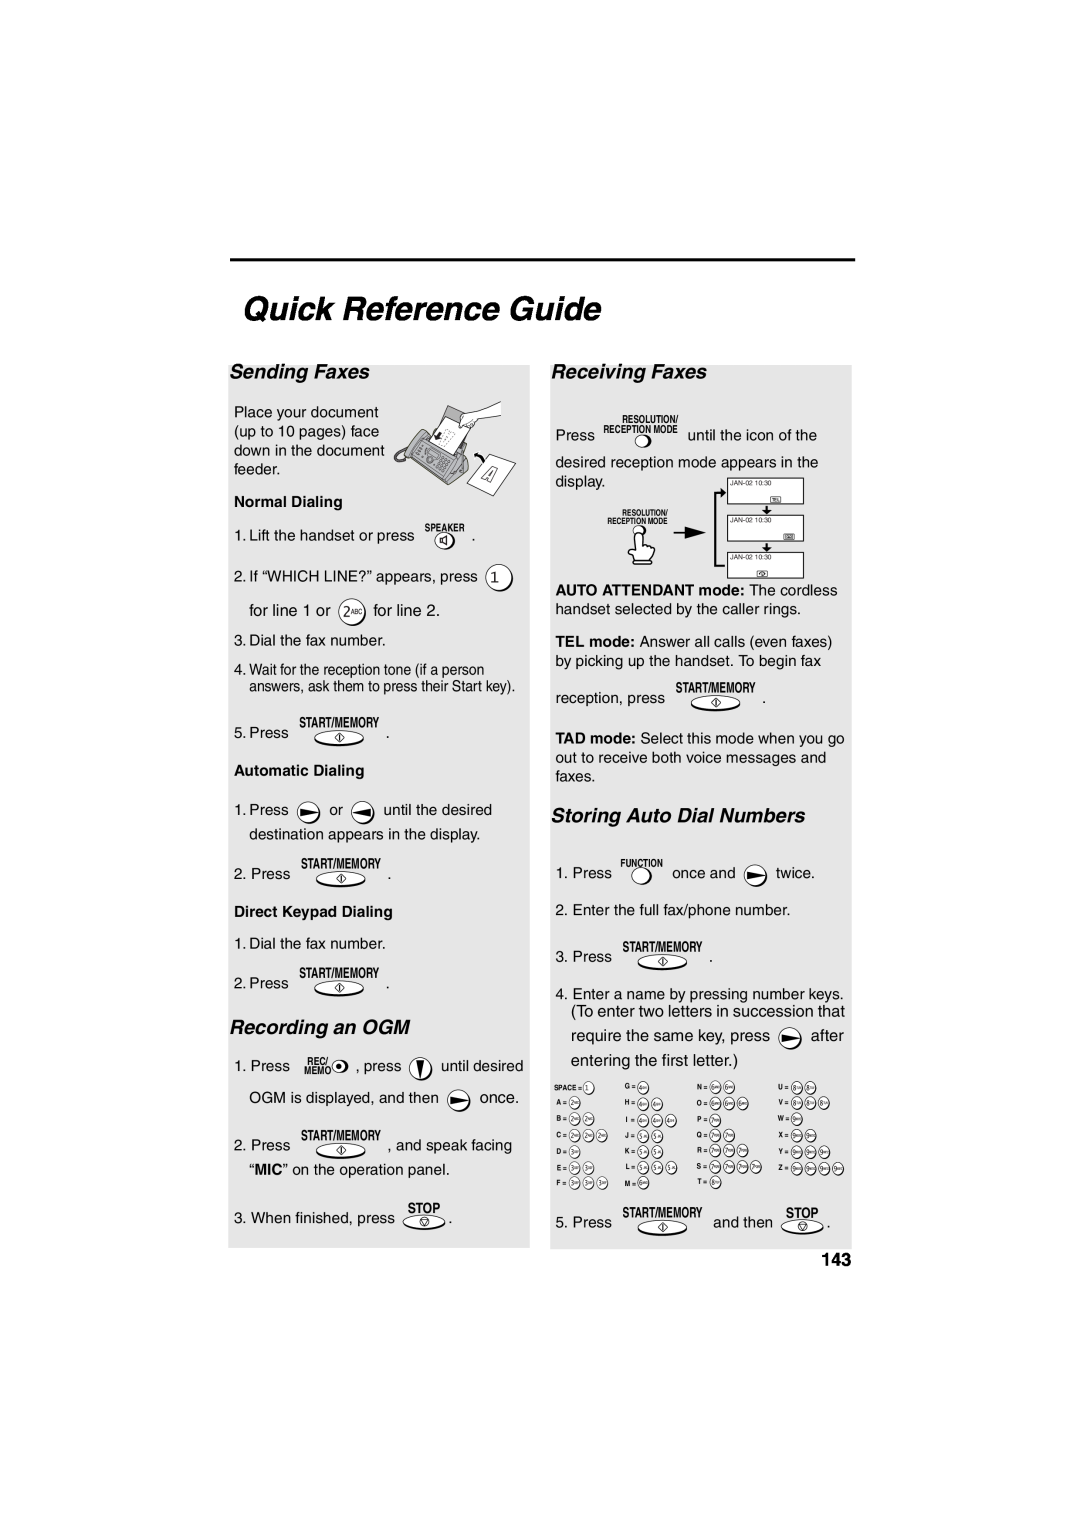 Sharp UX-CD600 Quick Reference Guide, Sending Faxes, Recording an OGM, Receiving Faxes, Storing Auto Dial Numbers, Press 